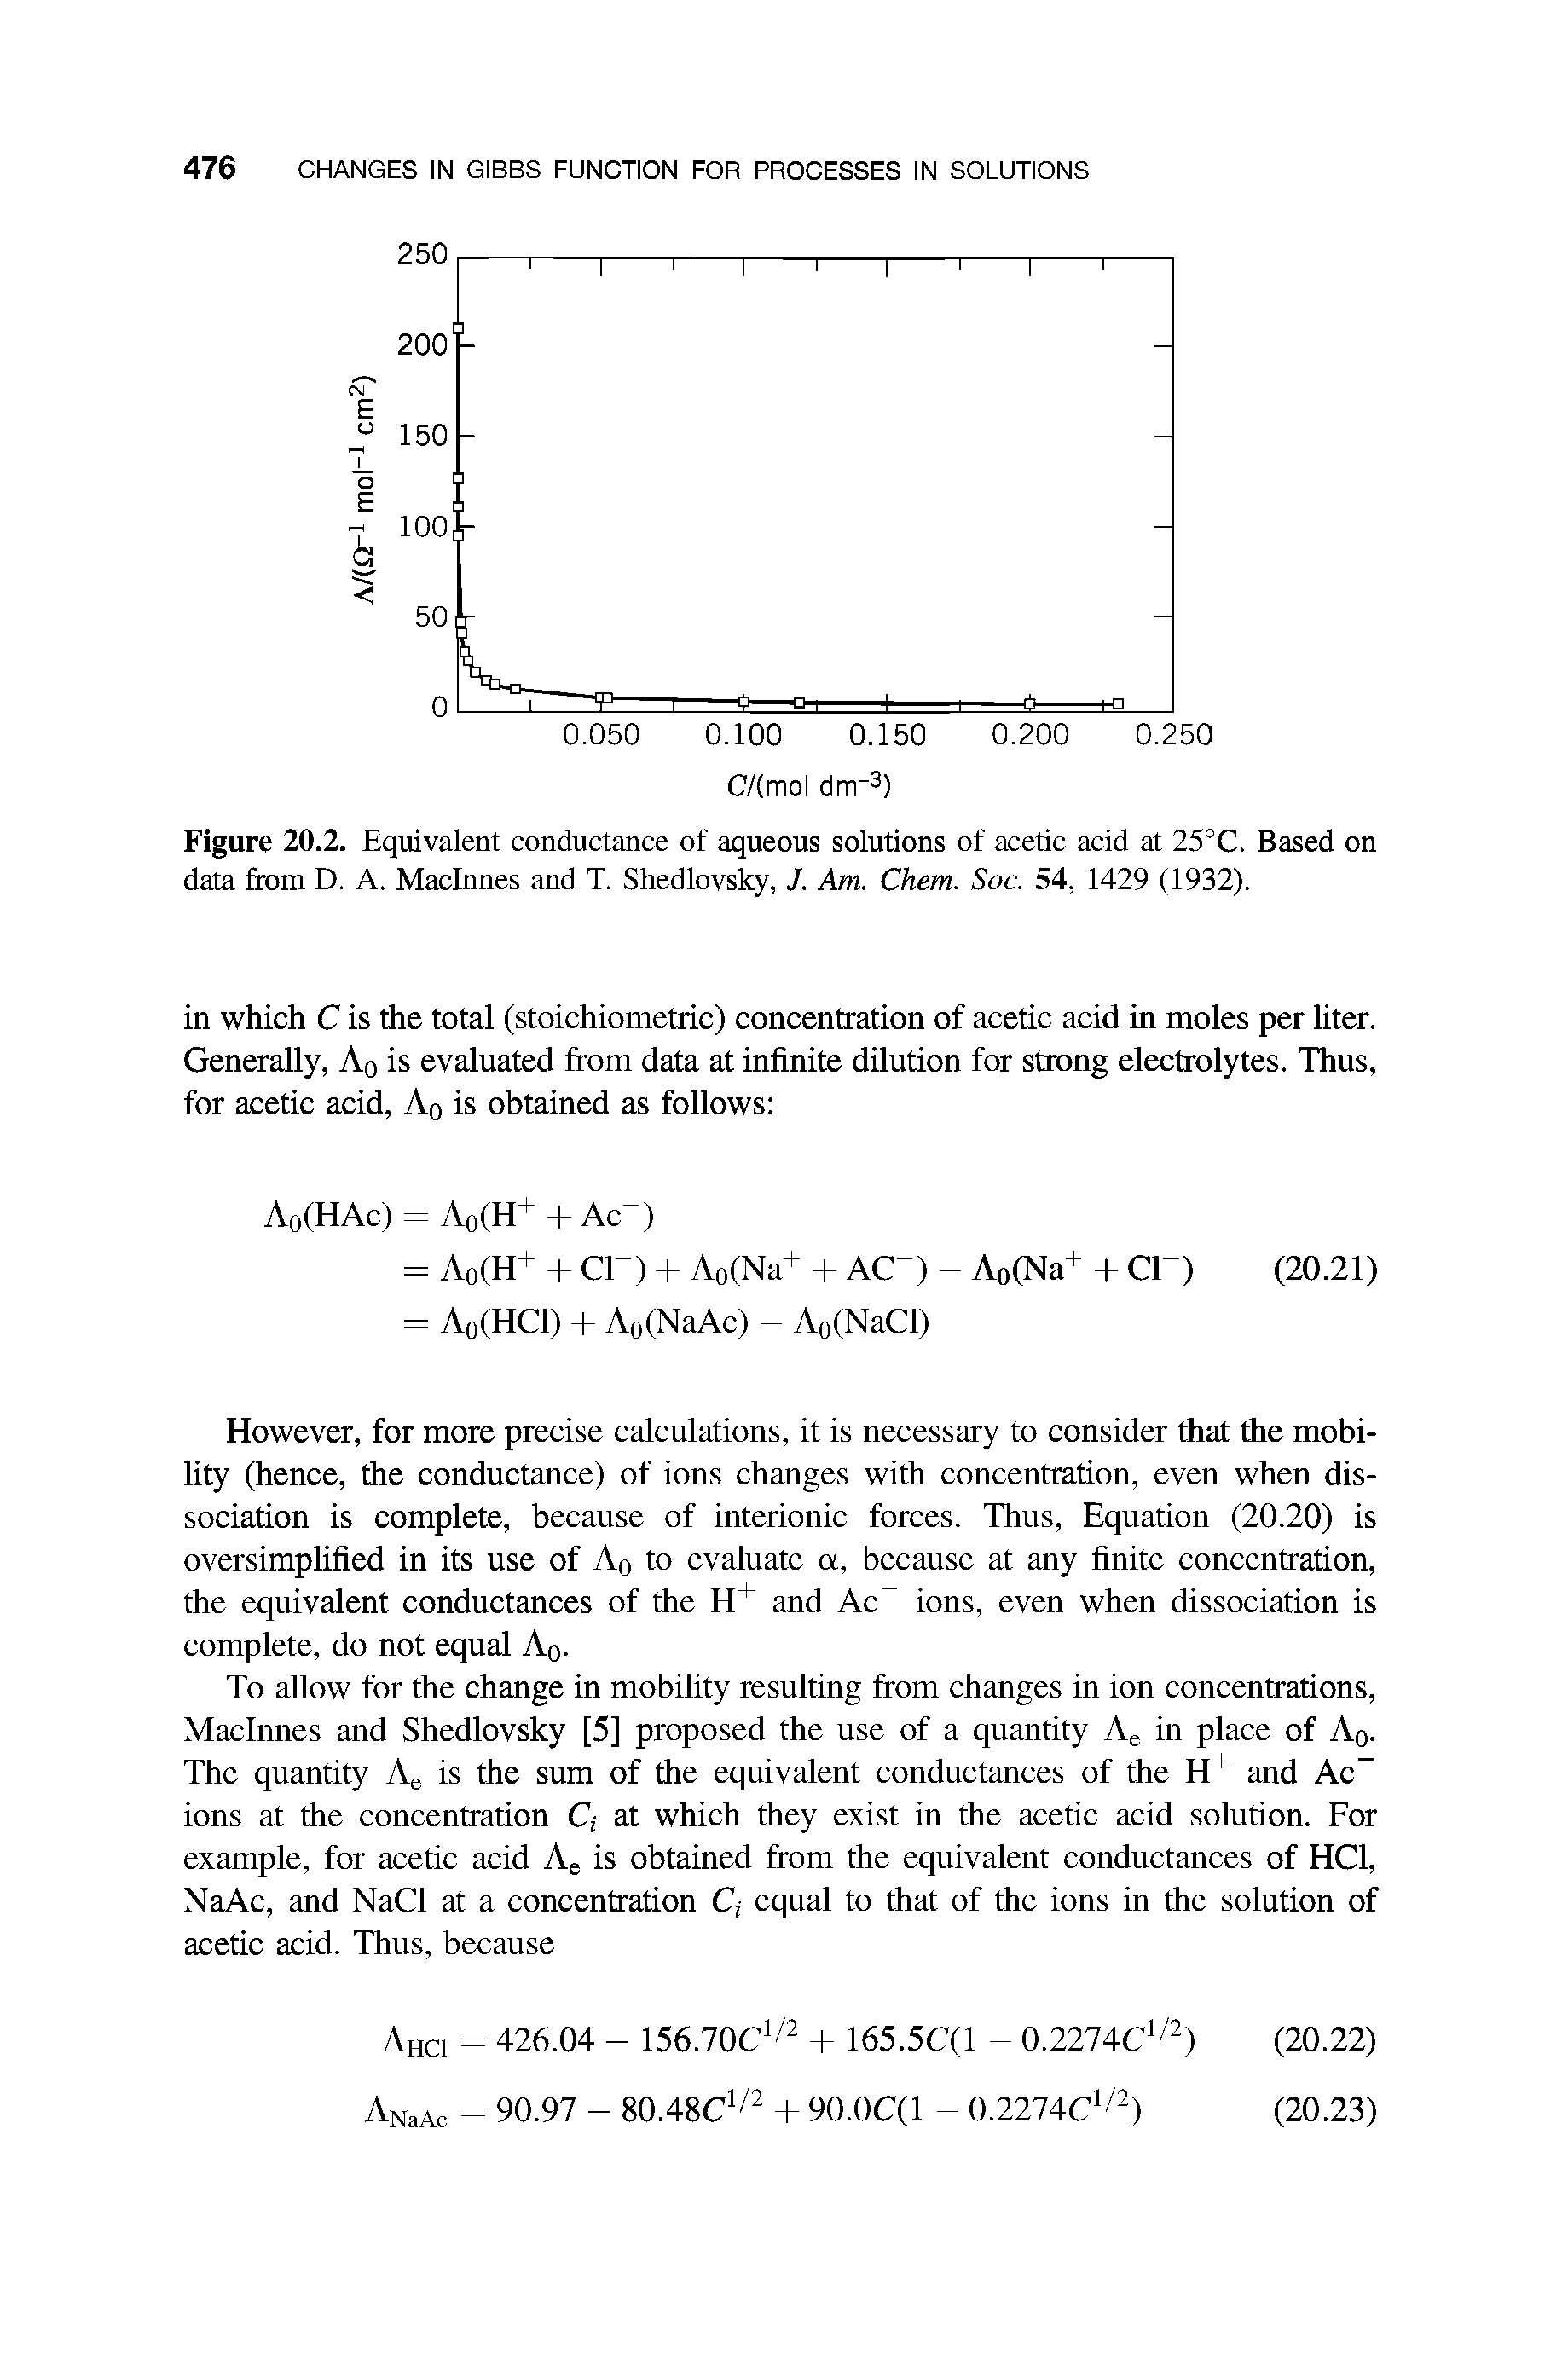 Figure 20.2. Equivalent conductance of aqueous solutions of acetic acid at 25°C. Based on data from D. A. Macinnes and T. Shedlovsky, J. Am. Chem. Soc. 54, 1429 (1932).